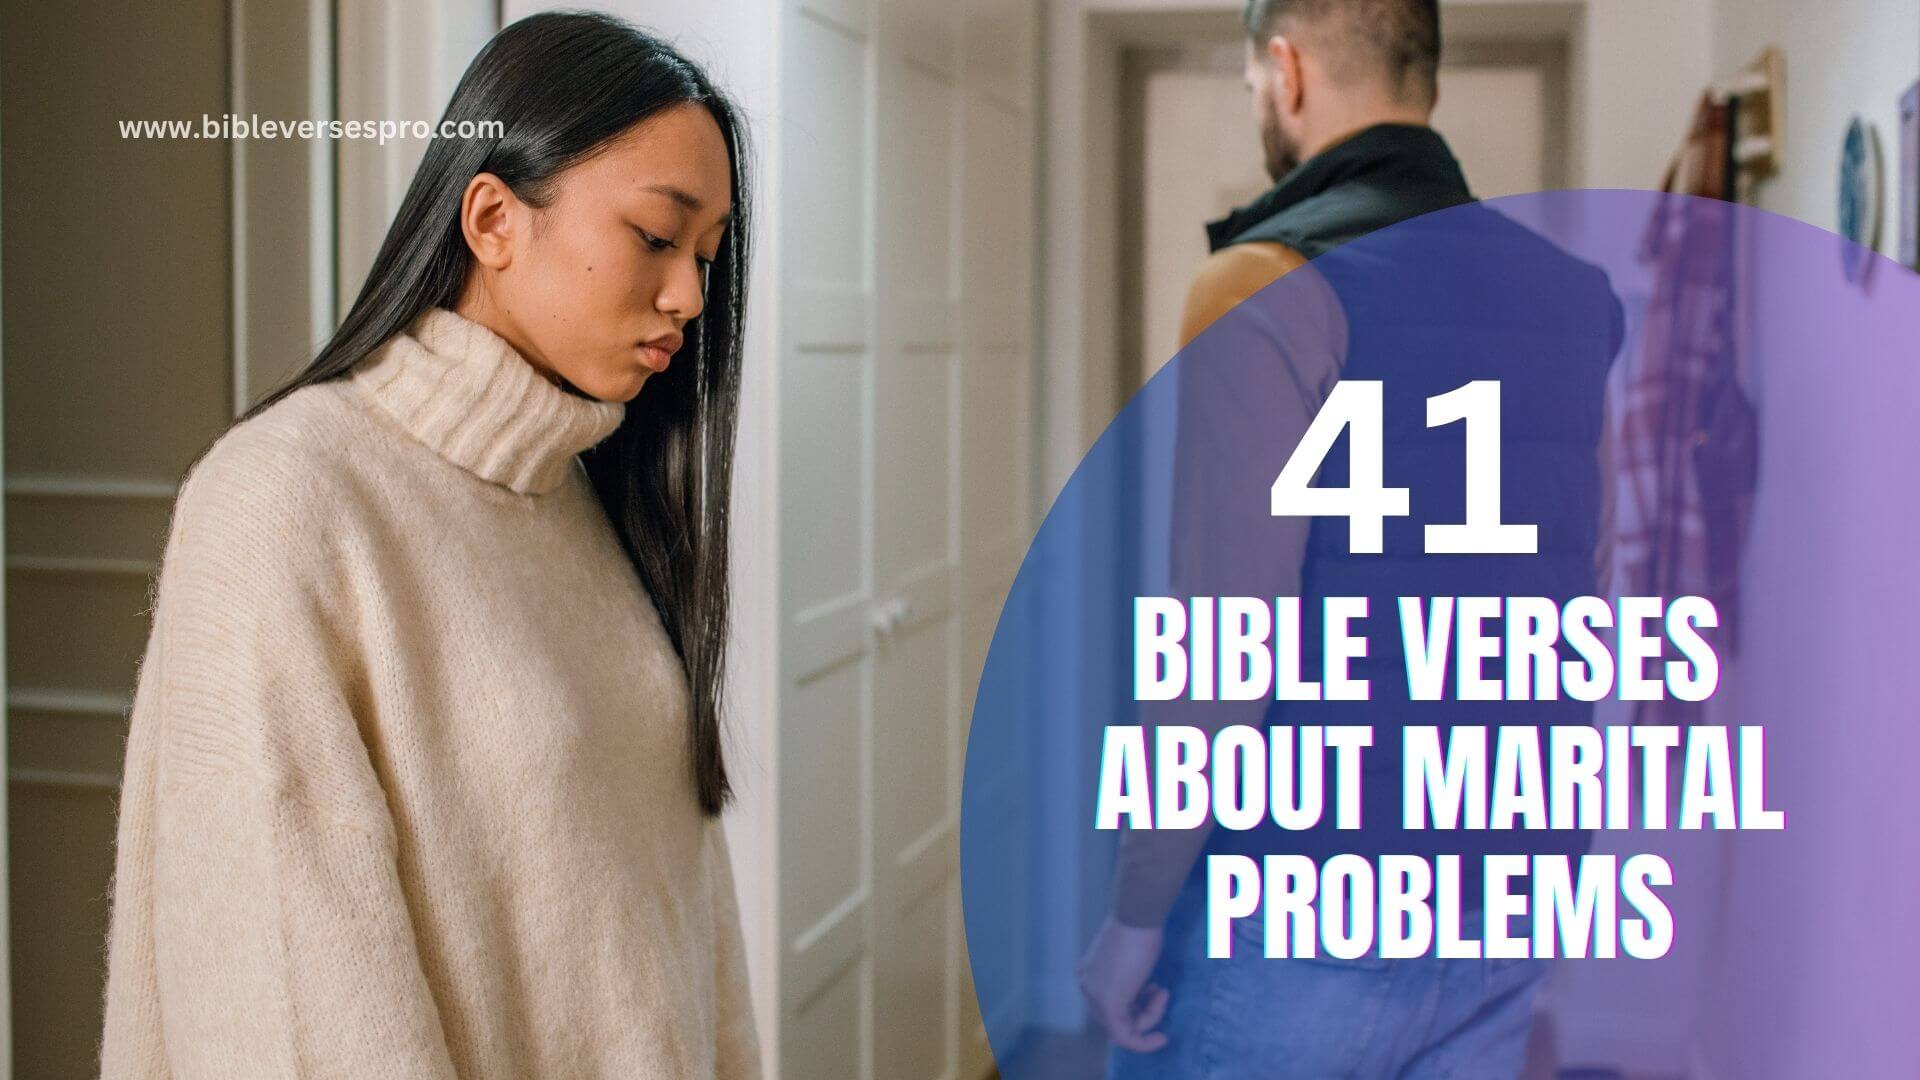 BIBLE VERSES ABOUT MARITAL PROBLEMS (1)